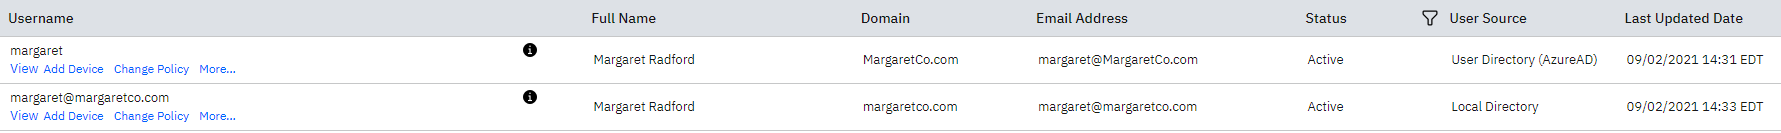 User Directory page in MaaS360 portal, which shows 2 users named 'margaret' and 'margaret@margaretco.com'